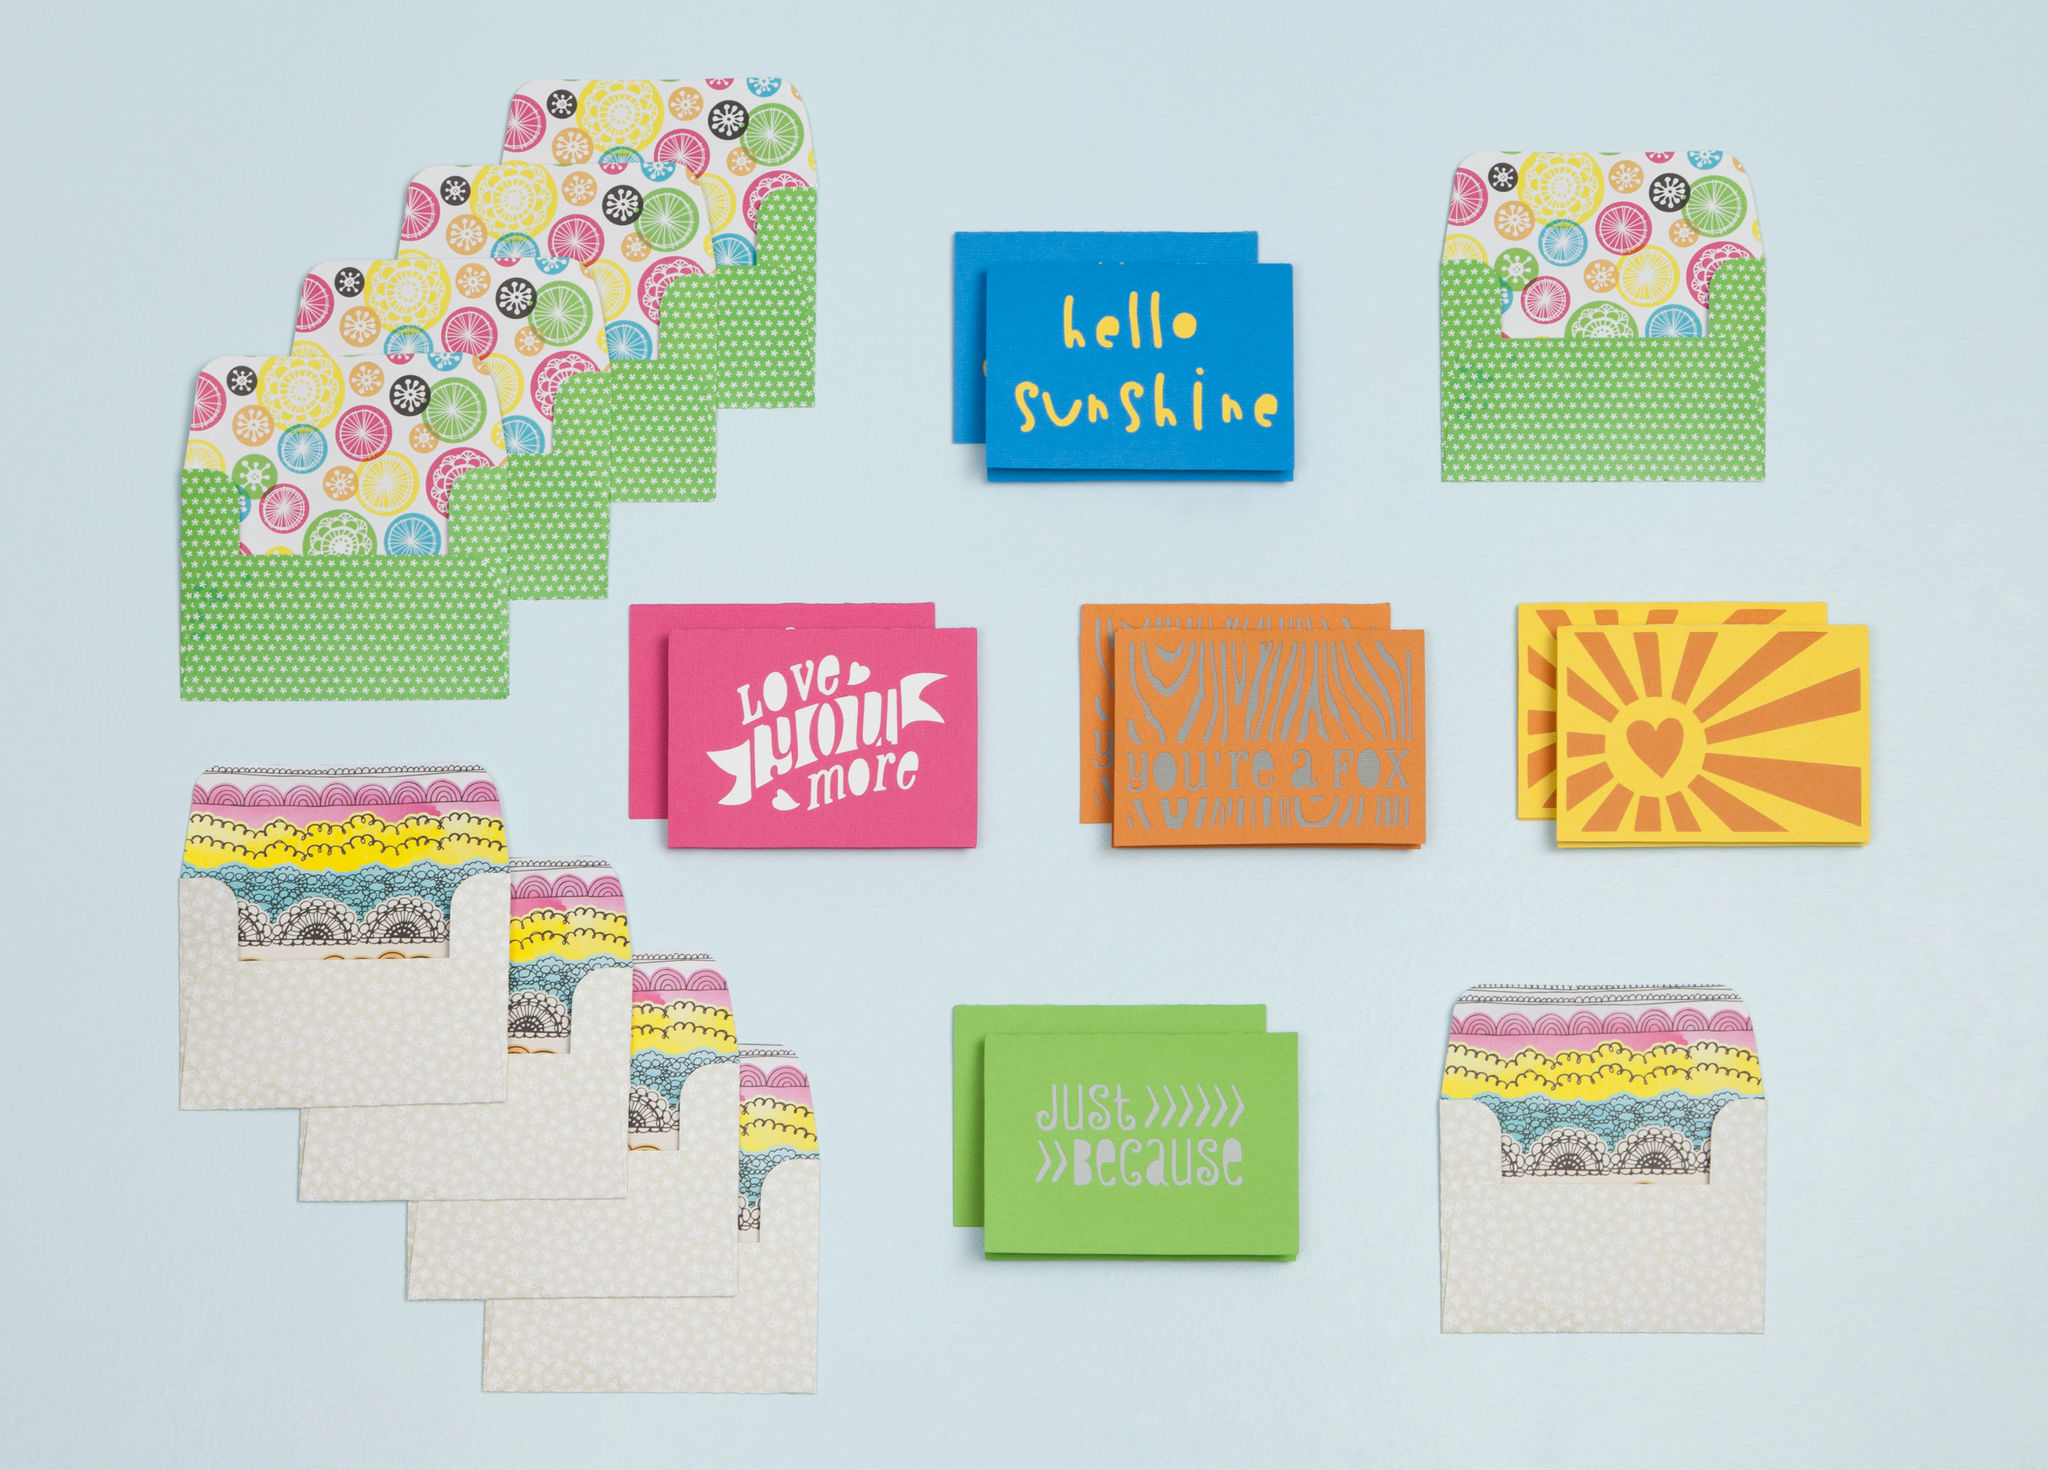 Cards and envelopes in the Cricut Sunshine card set